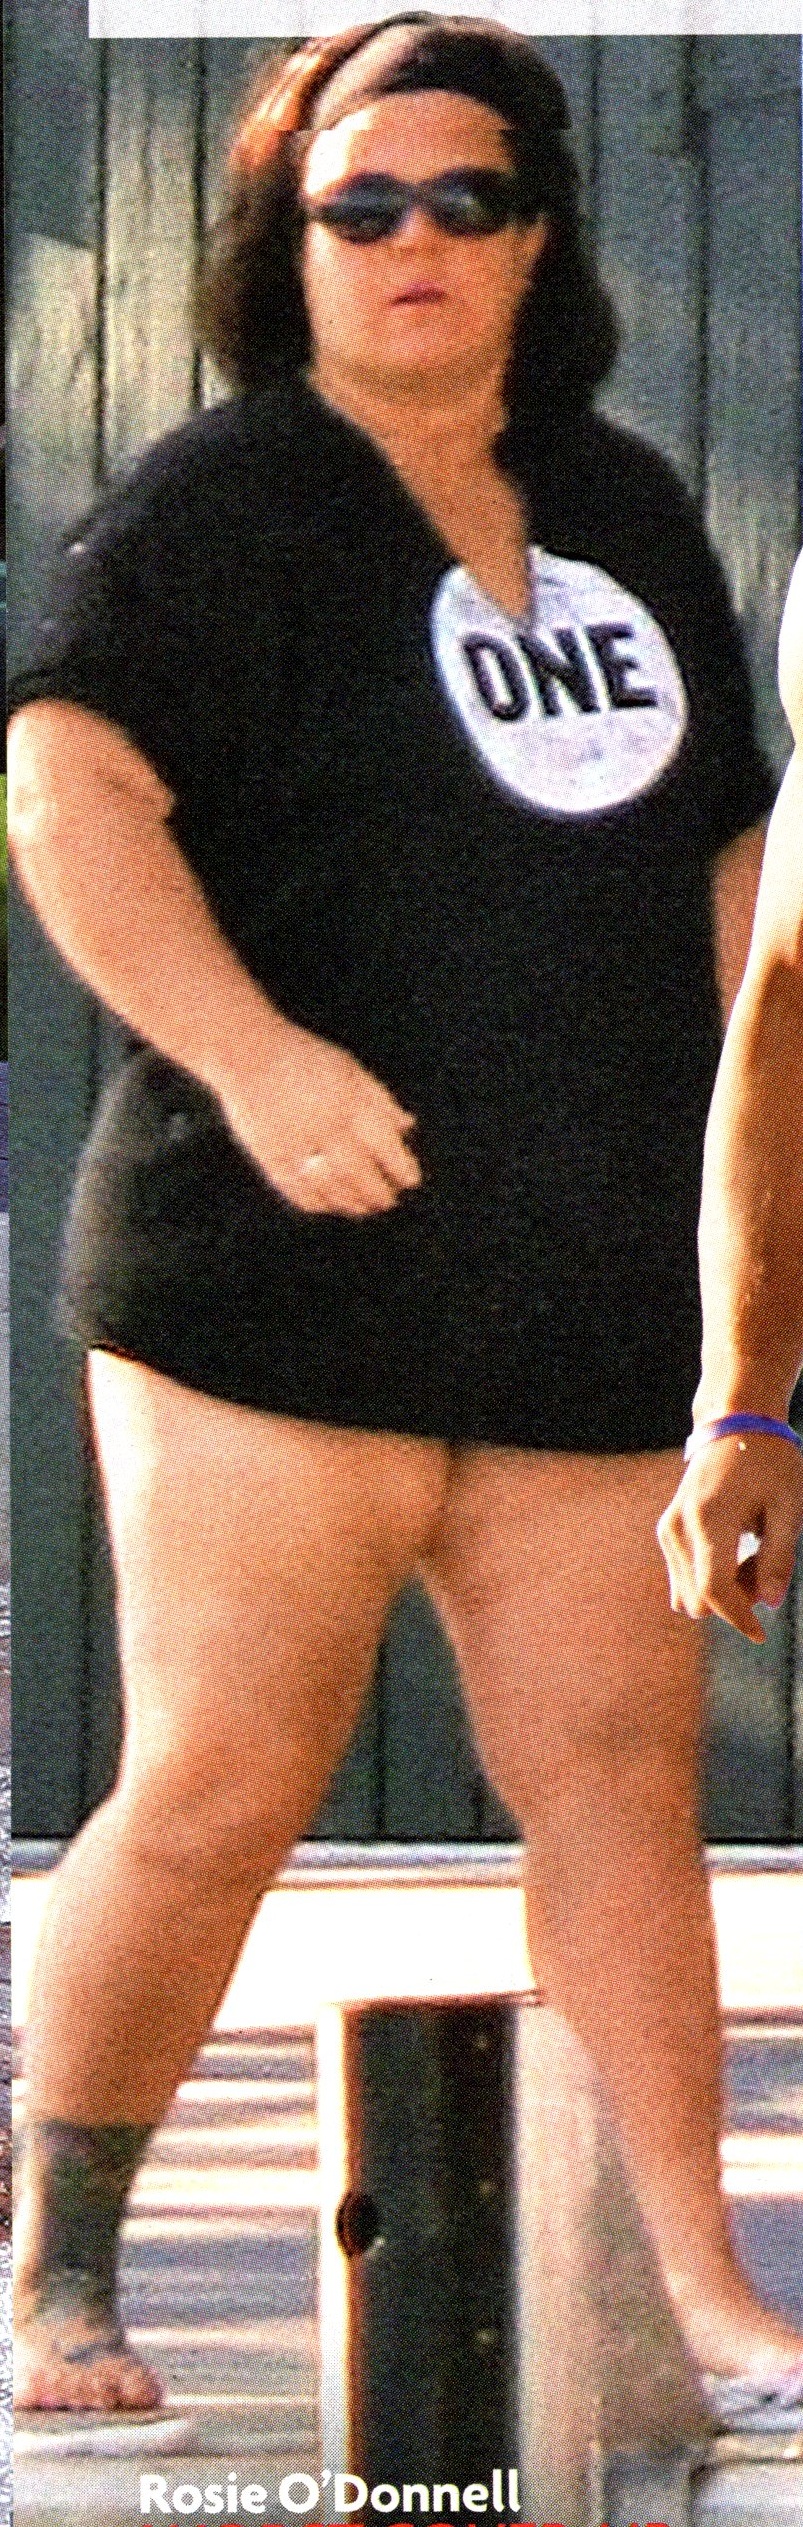 Rosie O'Donnell Photos : Rosie O'Donnell's Feet (502176) .